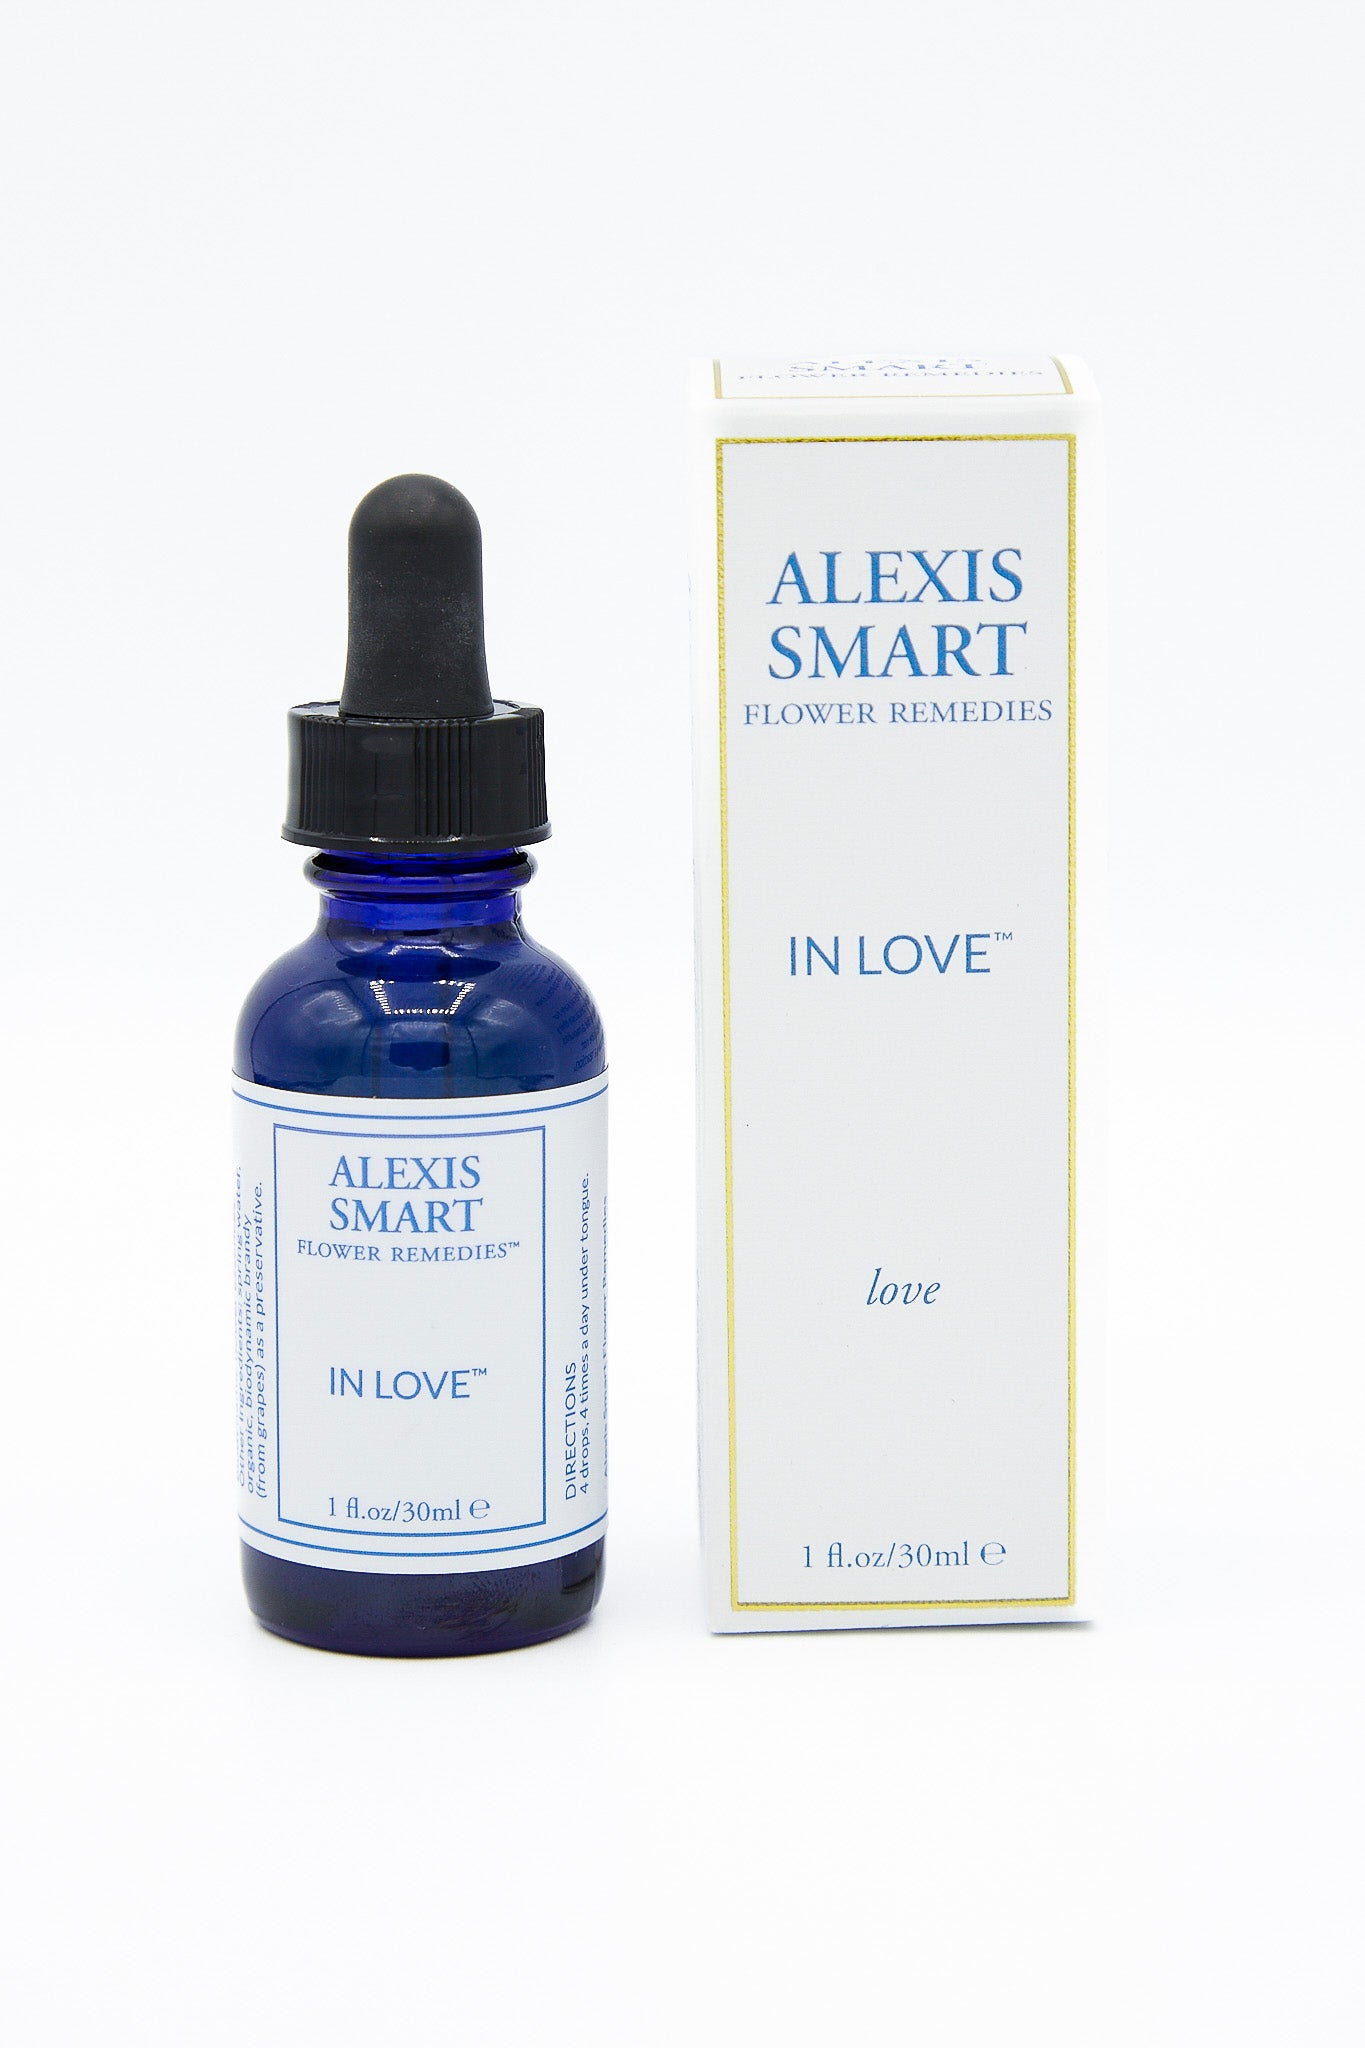 Alexis Smart Flower Remedies - In Love in self-love and relationships.